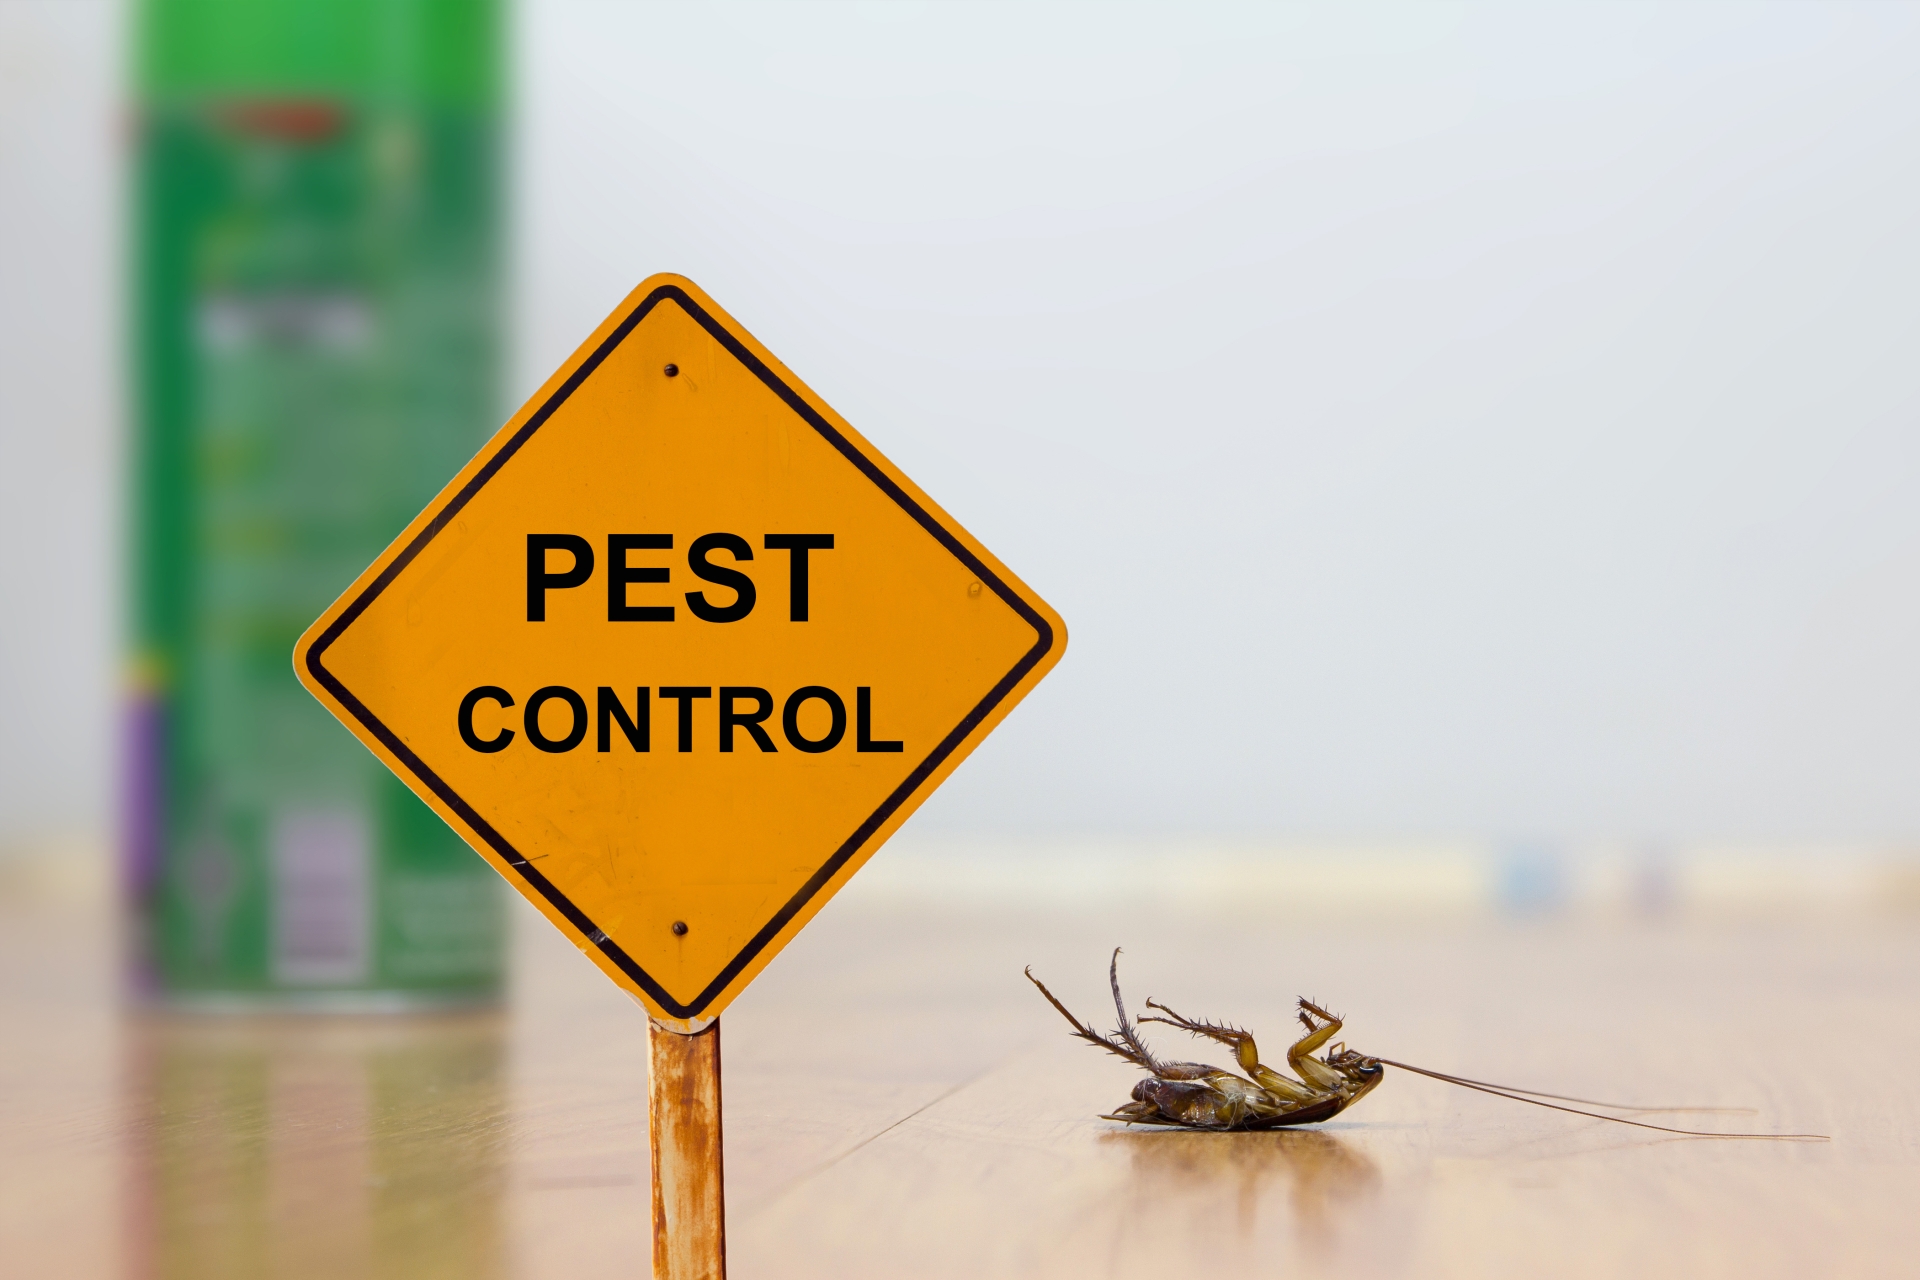 24 Hour Pest Control, Pest Control in Waterloo, SE1. Call Now 020 8166 9746